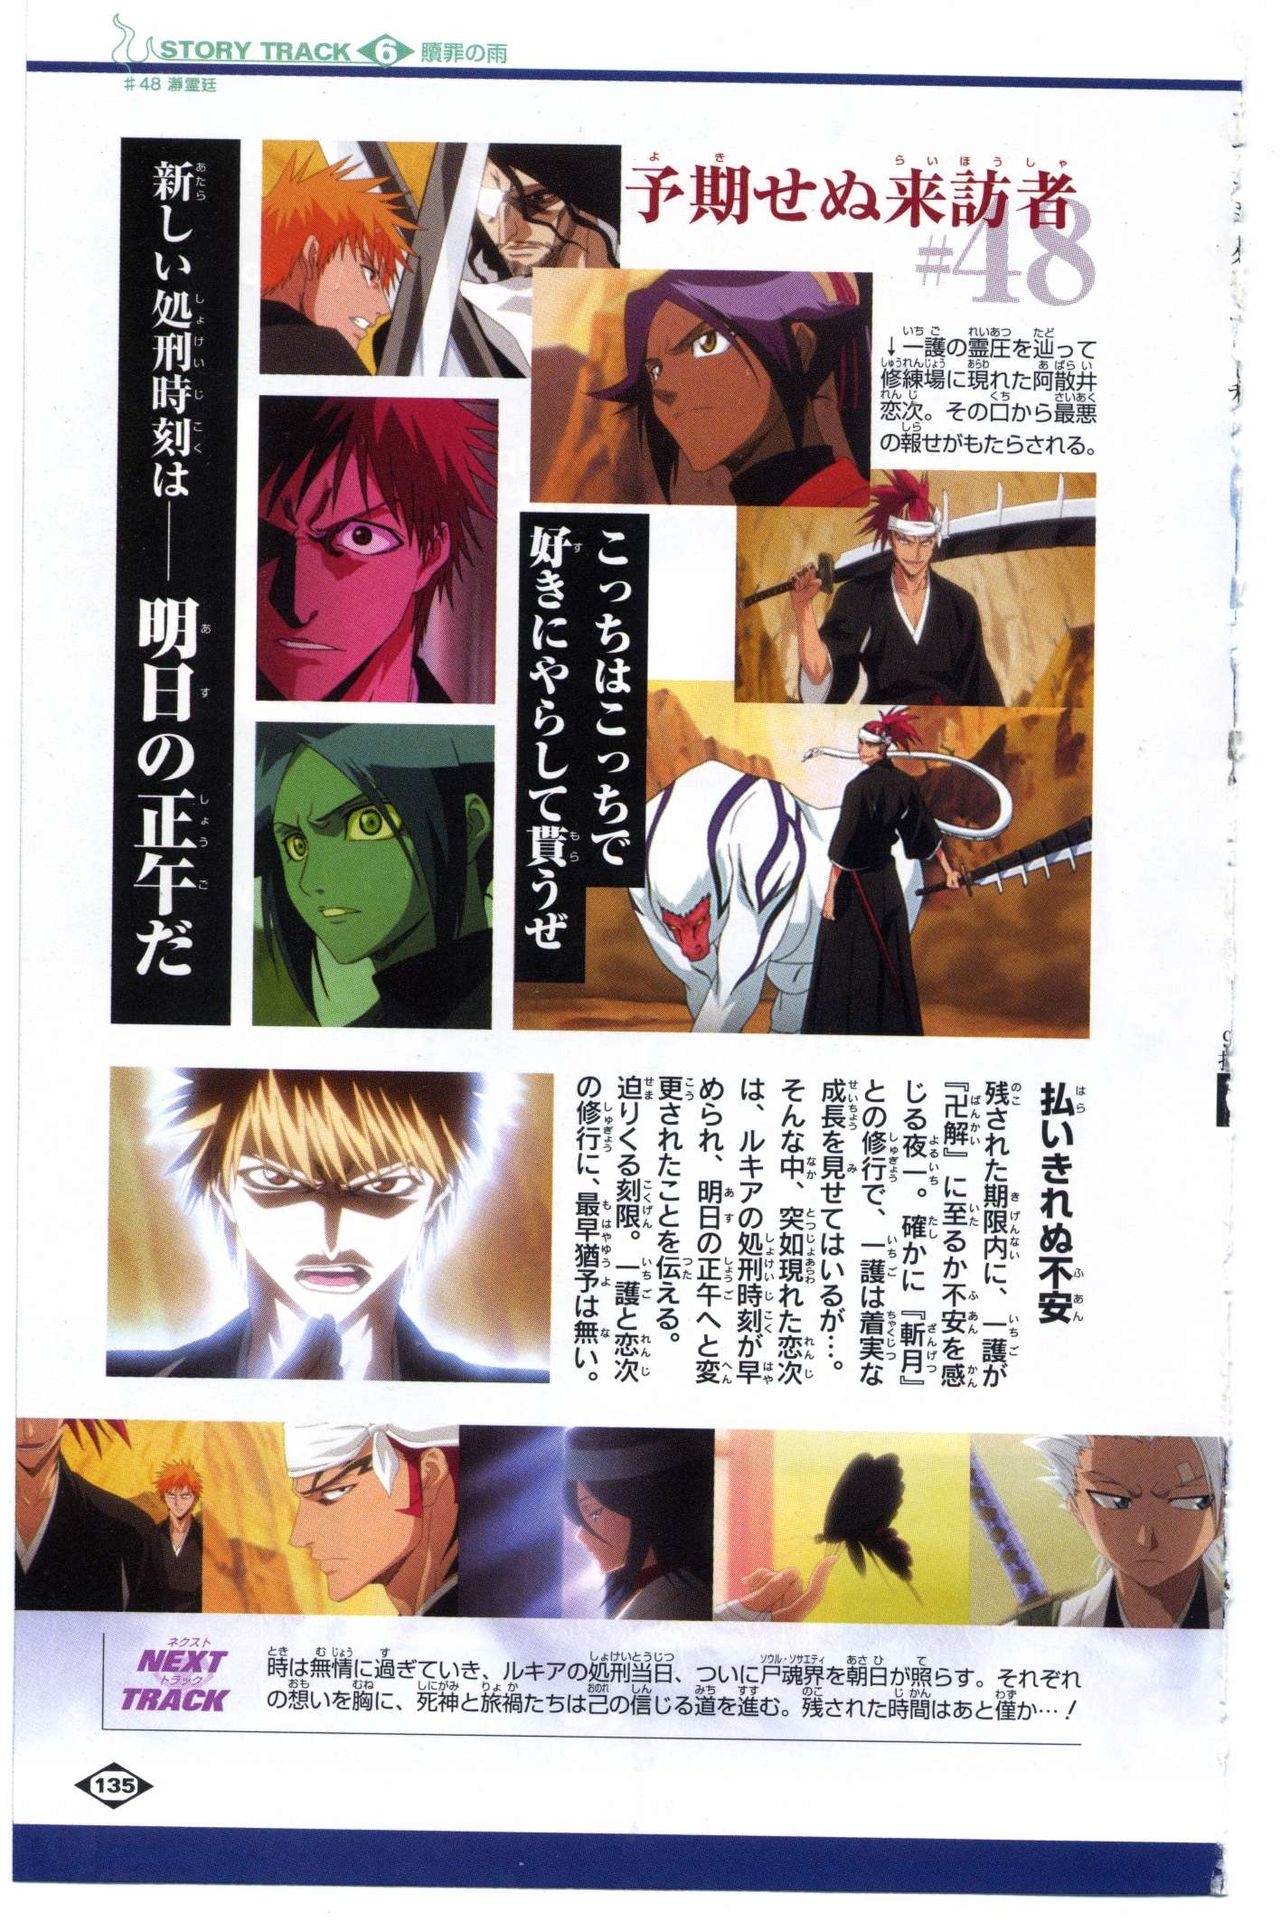 Bleach: Official Animation Book VIBEs 135